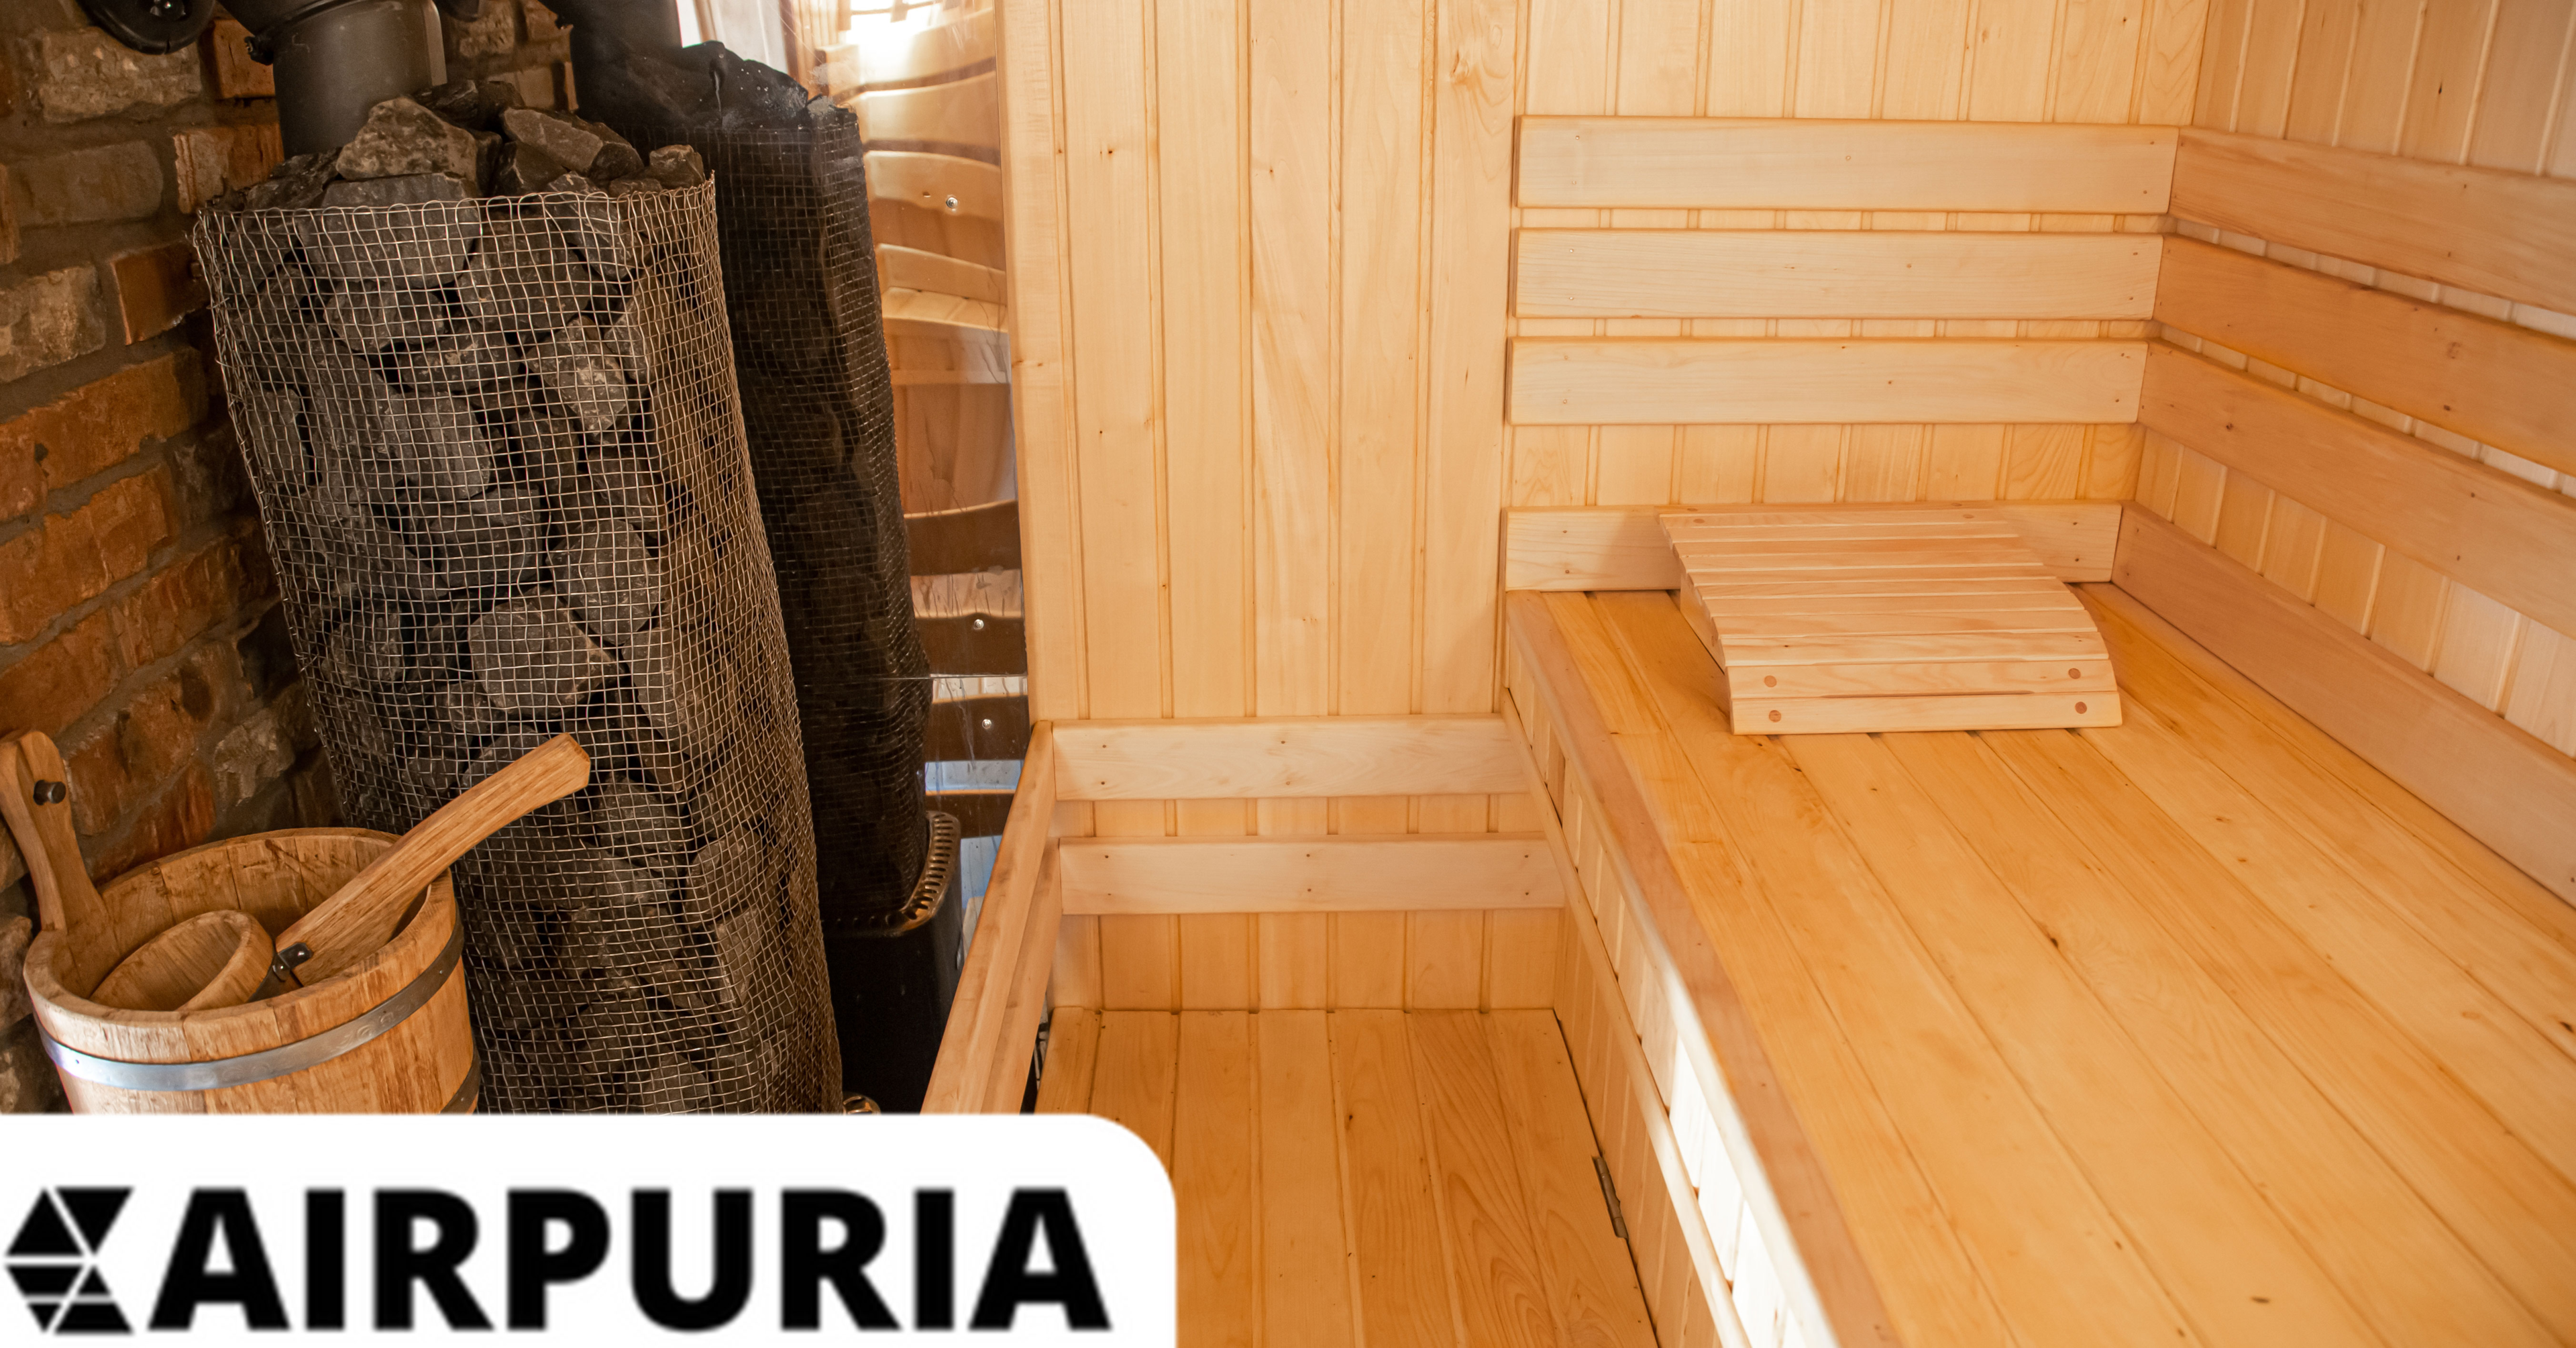 Image illustrating the difference between infrared saunas and traditional saunas.